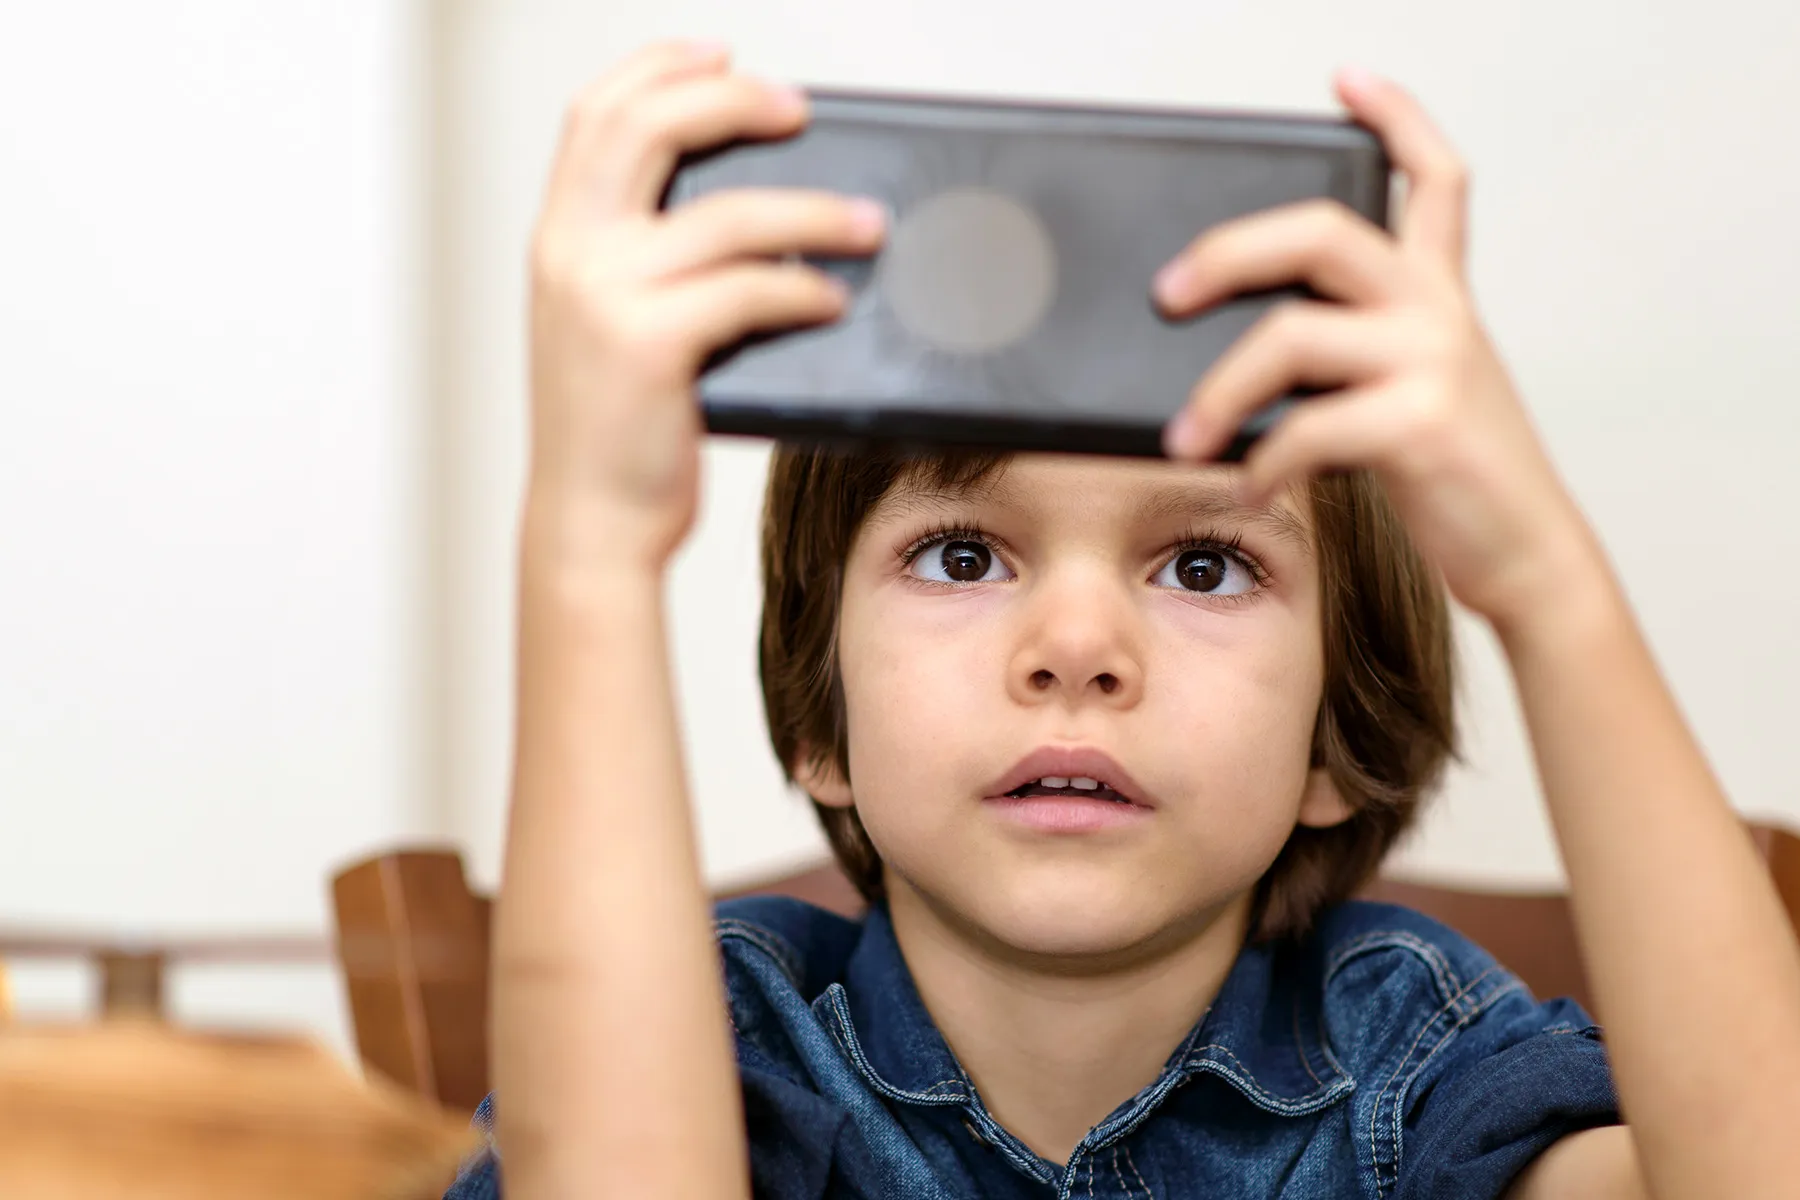 photo of child playing with handheld video game